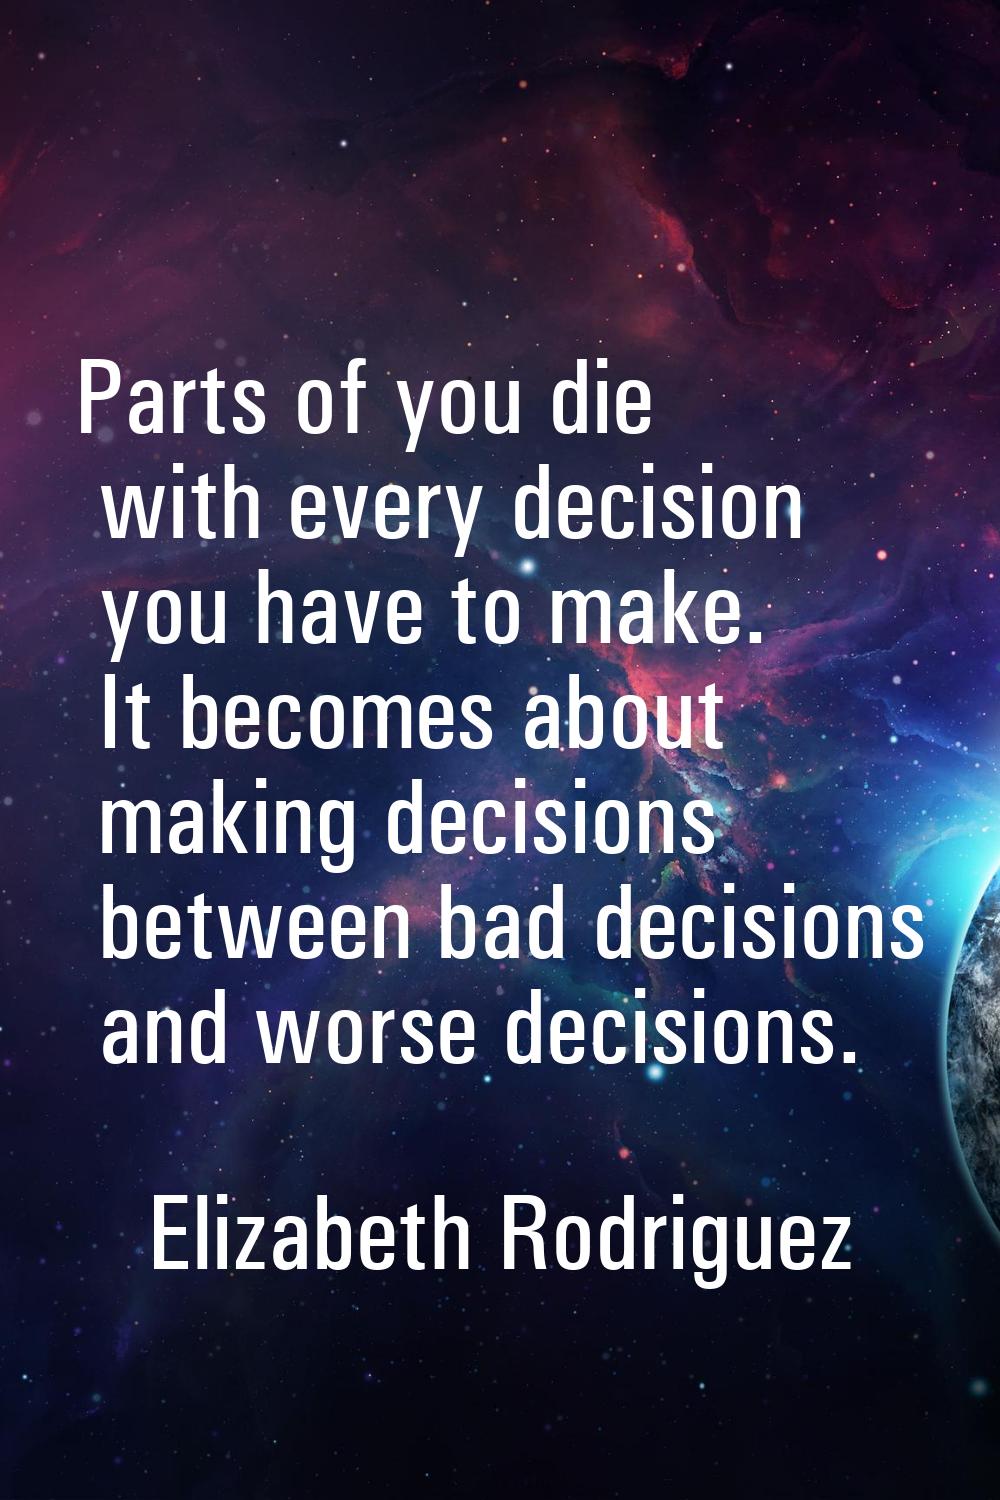 Parts of you die with every decision you have to make. It becomes about making decisions between ba